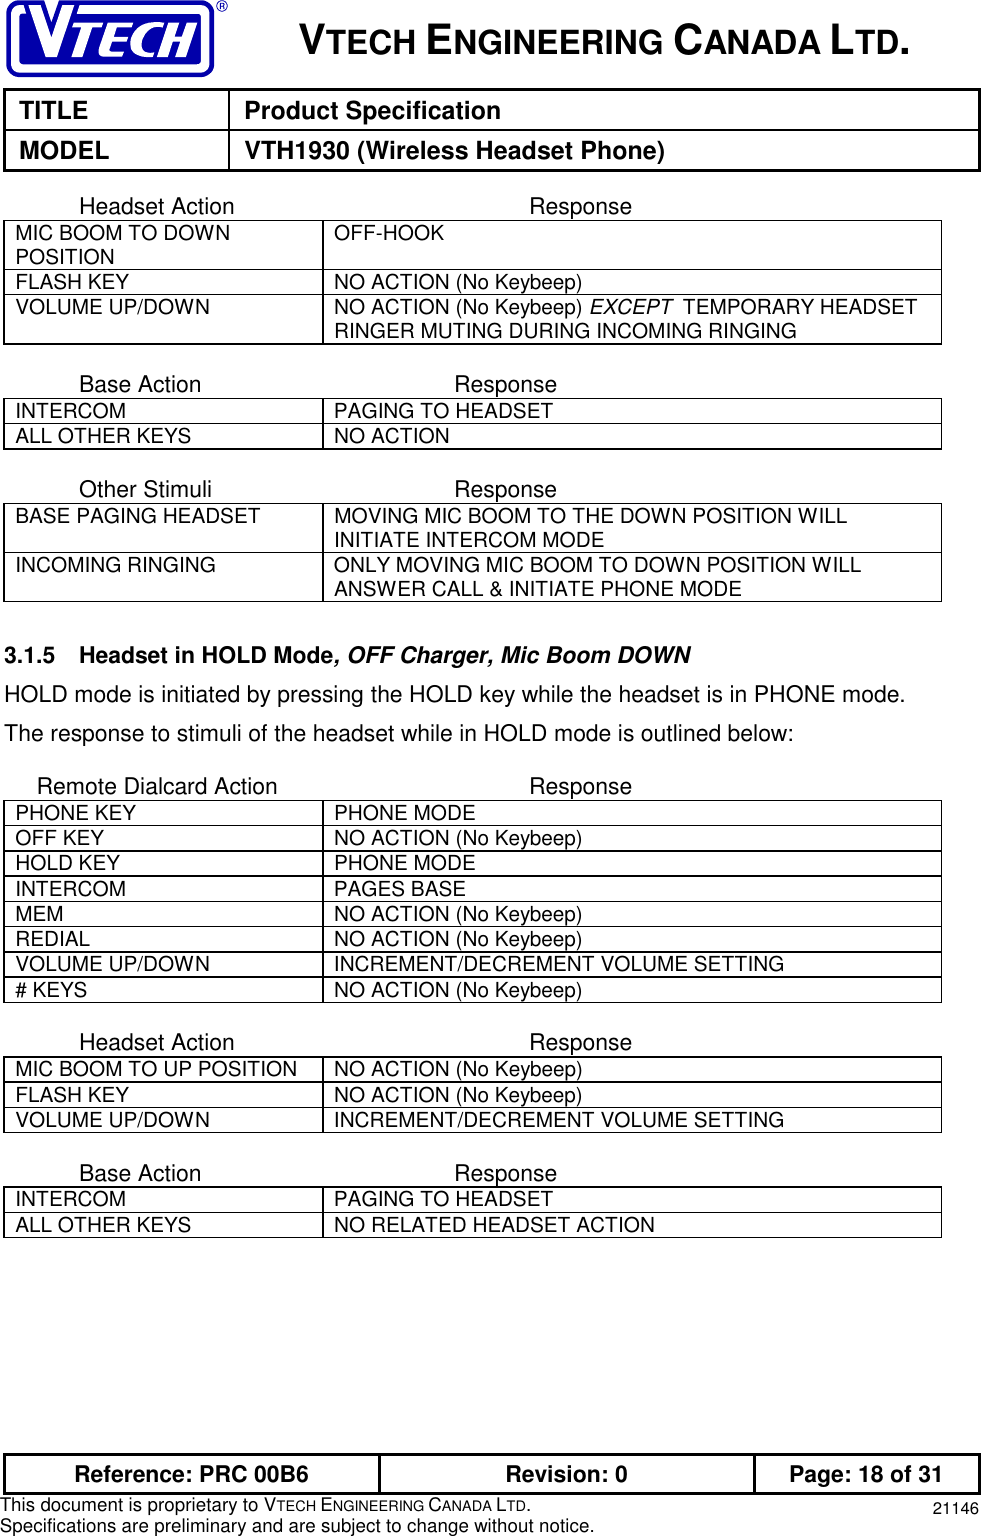 VTECH ENGINEERING CANADA LTD.TITLE Product SpecificationMODEL VTH1930 (Wireless Headset Phone)Reference: PRC 00B6 Revision: 0 Page: 18 of 31This document is proprietary to VTECH ENGINEERING CANADA LTD.Specifications are preliminary and are subject to change without notice. 21146Headset Action ResponseMIC BOOM TO DOWNPOSITION OFF-HOOKFLASH KEY NO ACTION (No Keybeep)VOLUME UP/DOWN NO ACTION (No Keybeep) EXCEPT  TEMPORARY HEADSETRINGER MUTING DURING INCOMING RINGINGBase Action ResponseINTERCOM PAGING TO HEADSETALL OTHER KEYS NO ACTIONOther Stimuli ResponseBASE PAGING HEADSET MOVING MIC BOOM TO THE DOWN POSITION WILLINITIATE INTERCOM MODEINCOMING RINGING ONLY MOVING MIC BOOM TO DOWN POSITION WILLANSWER CALL &amp; INITIATE PHONE MODE3.1.5 Headset in HOLD Mode, OFF Charger, Mic Boom DOWNHOLD mode is initiated by pressing the HOLD key while the headset is in PHONE mode.The response to stimuli of the headset while in HOLD mode is outlined below:     Remote Dialcard Action ResponsePHONE KEY PHONE MODEOFF KEY NO ACTION (No Keybeep)HOLD KEY PHONE MODEINTERCOM PAGES BASEMEM NO ACTION (No Keybeep)REDIAL NO ACTION (No Keybeep)VOLUME UP/DOWN INCREMENT/DECREMENT VOLUME SETTING# KEYS NO ACTION (No Keybeep)Headset Action ResponseMIC BOOM TO UP POSITION NO ACTION (No Keybeep)FLASH KEY NO ACTION (No Keybeep)VOLUME UP/DOWN INCREMENT/DECREMENT VOLUME SETTINGBase Action ResponseINTERCOM PAGING TO HEADSETALL OTHER KEYS NO RELATED HEADSET ACTION